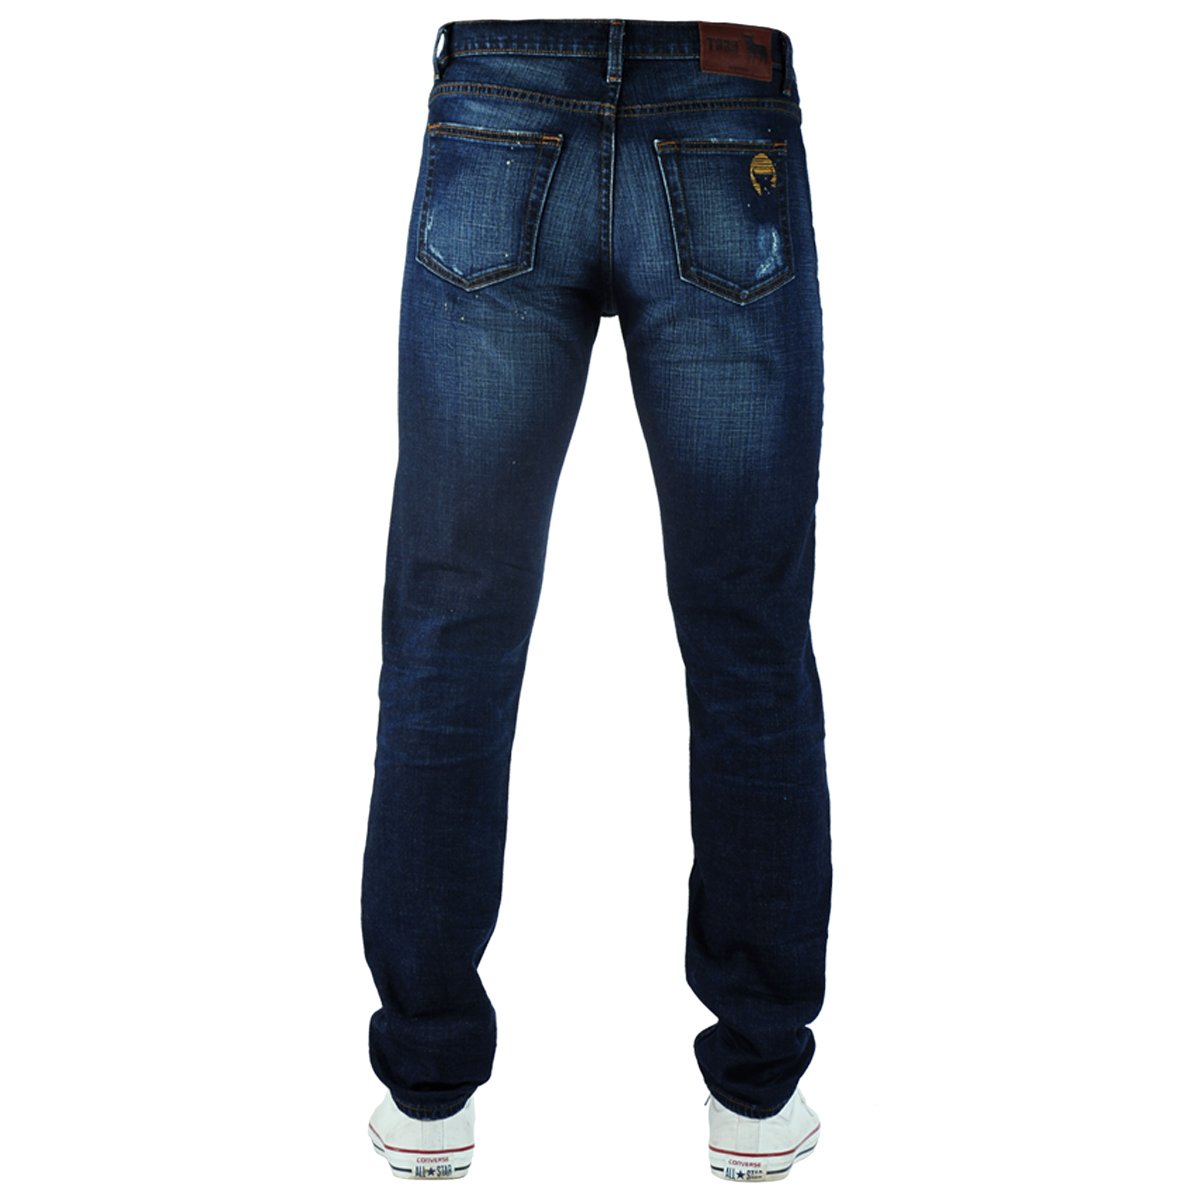 Jeans Toro Jeans, Strong Super Slim